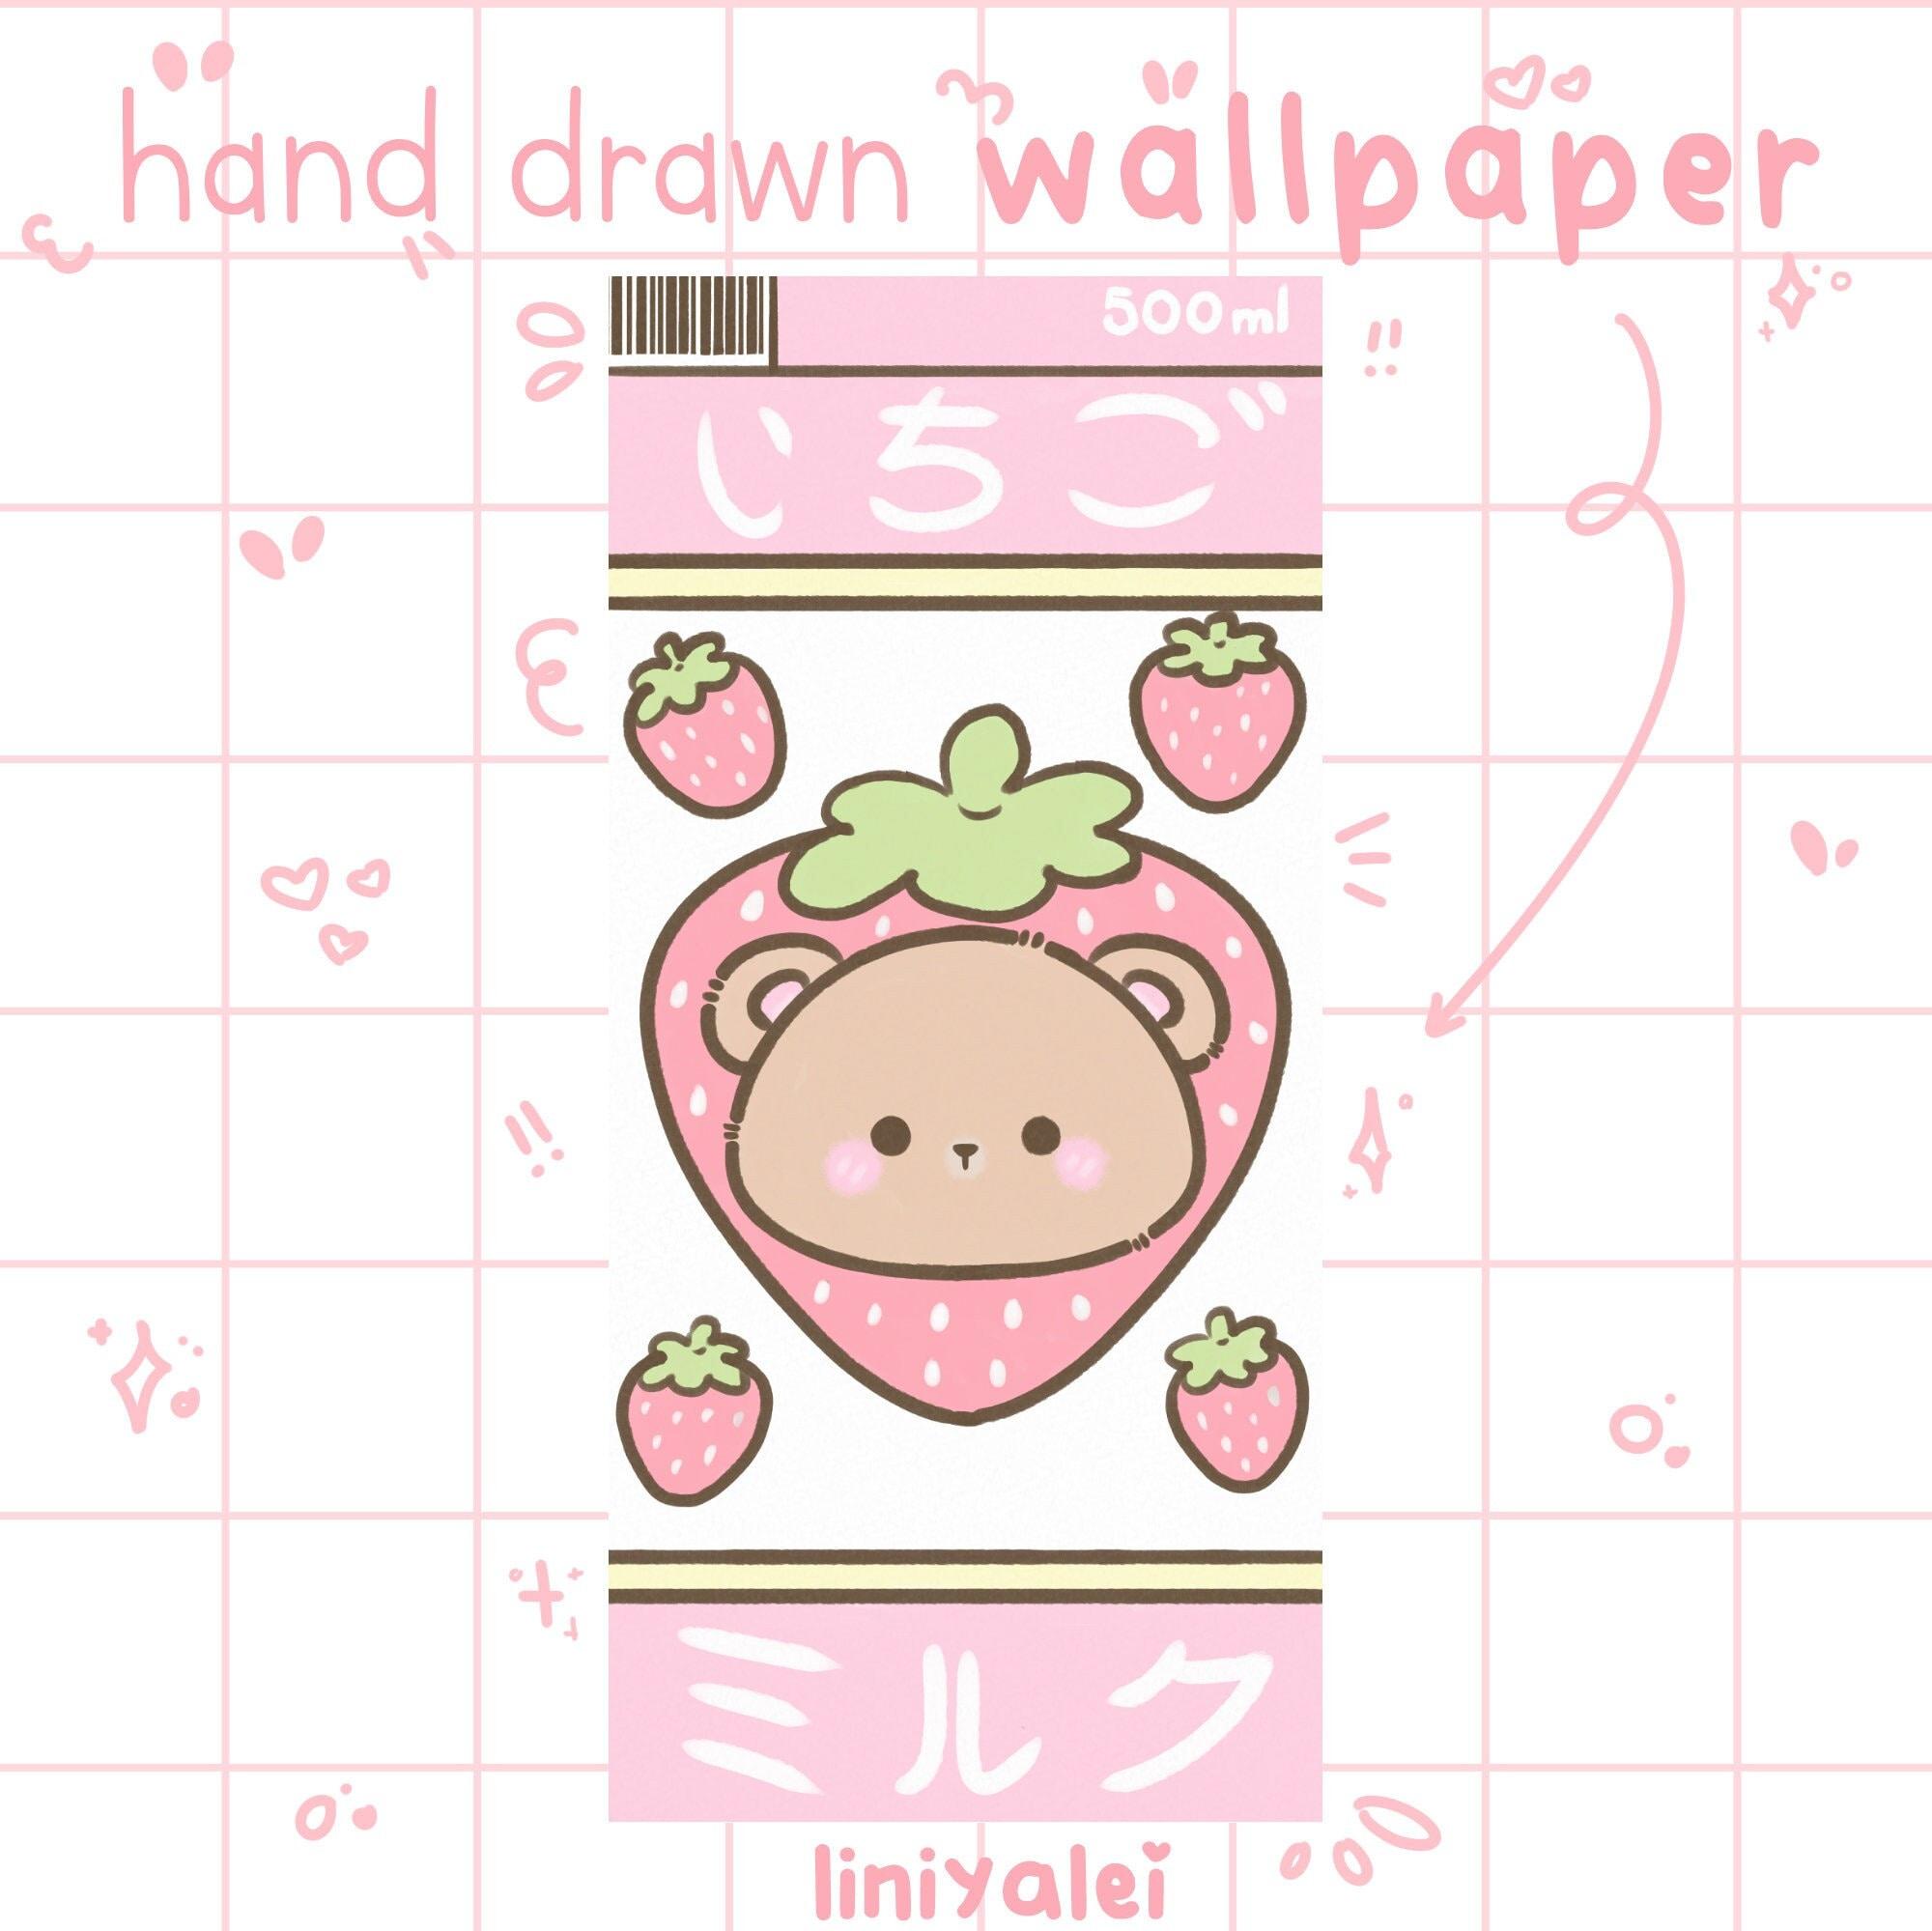 Kawaii Phone And iPhone Wallpaper Cute Pink For